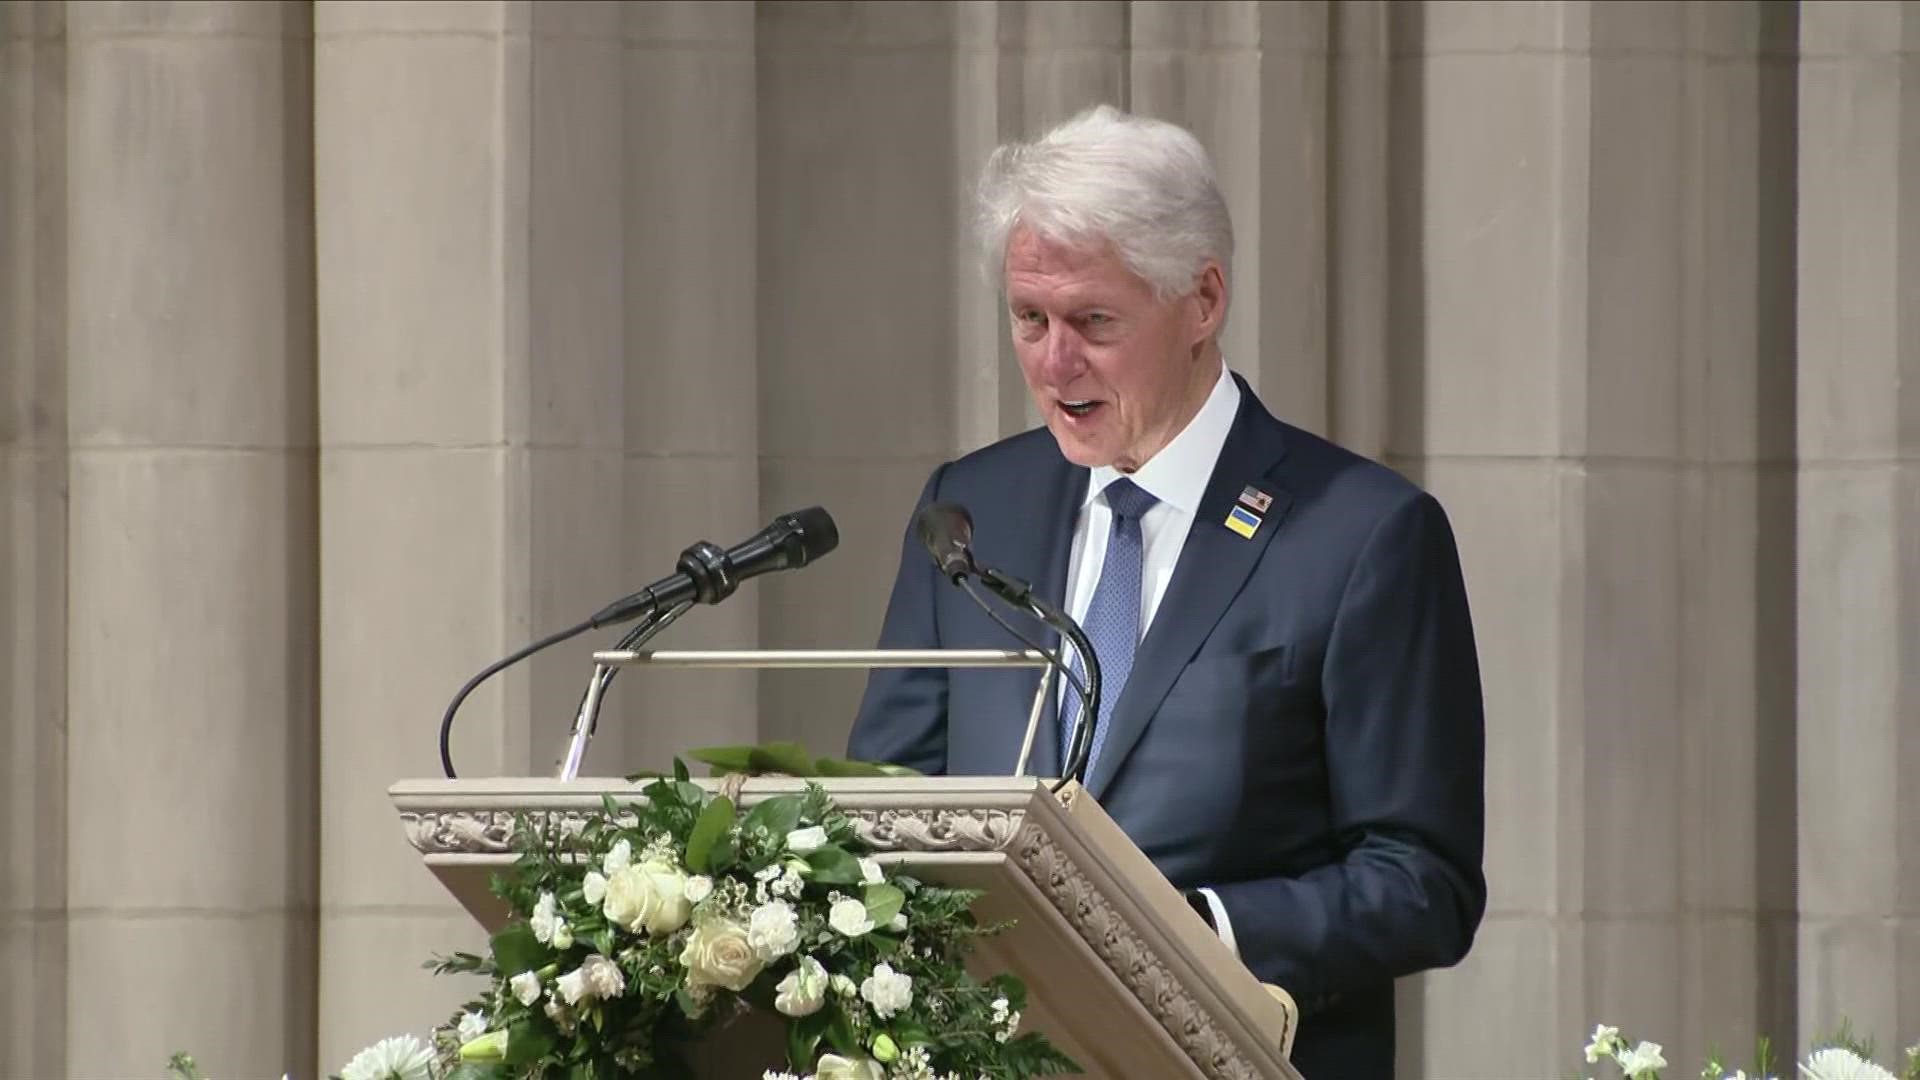 "She could be the voice of America at its best," former President Bill Clinton said of Madeleine Albright, the first female secretary of state.